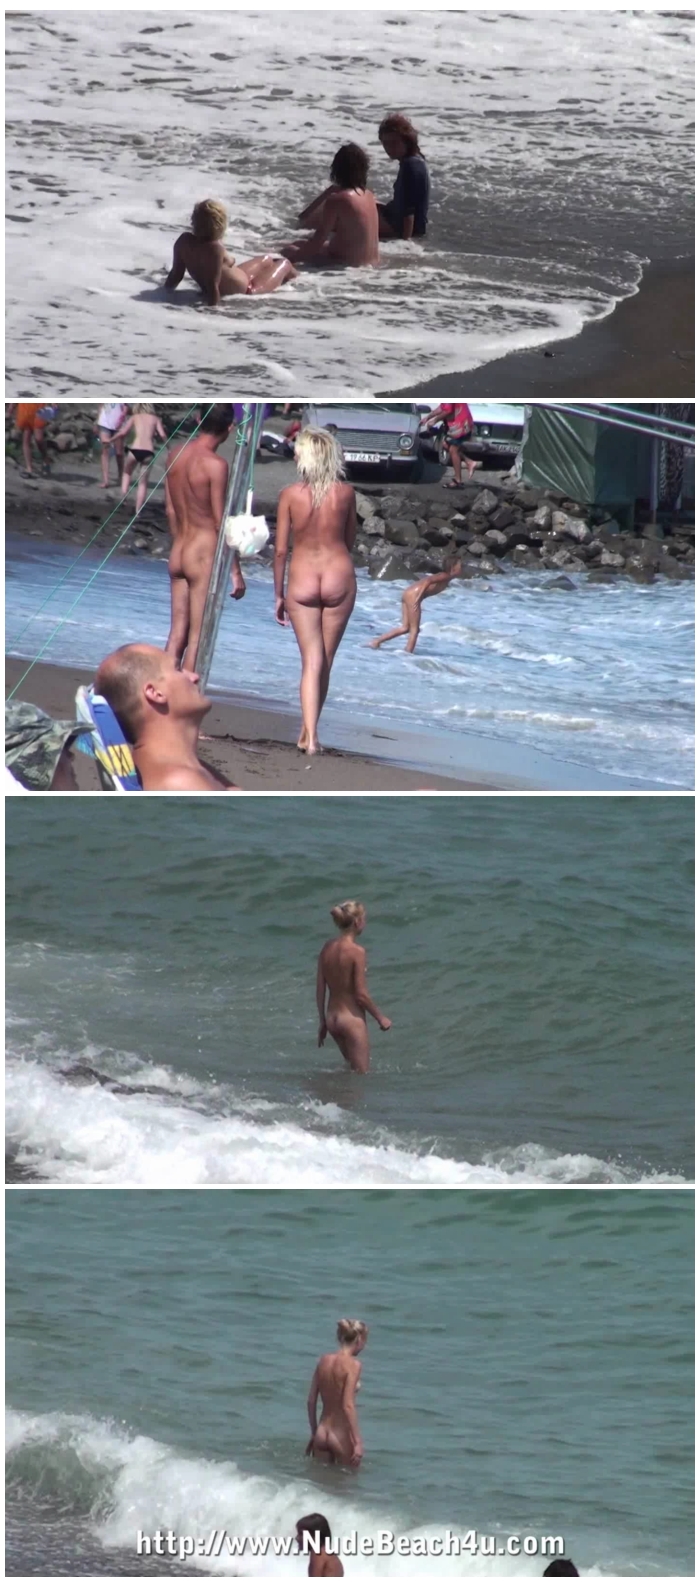 Nude Beach for You - voyeur adult Page 62 Sex-Forum picture pic